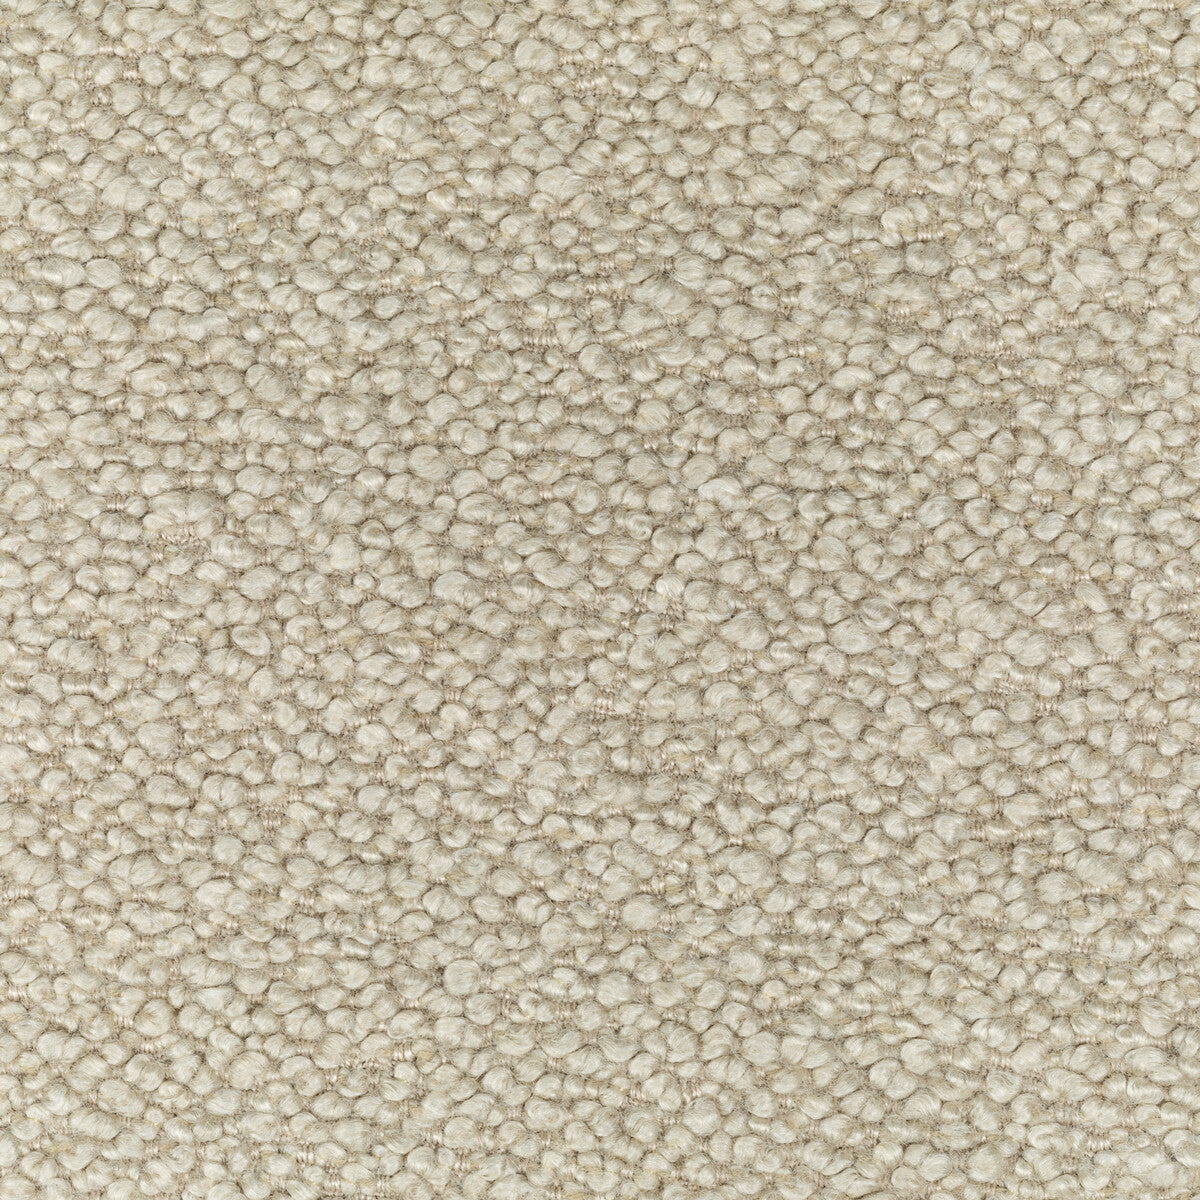 Babbit fabric in natural color - pattern 34956.106.0 - by Kravet Couture